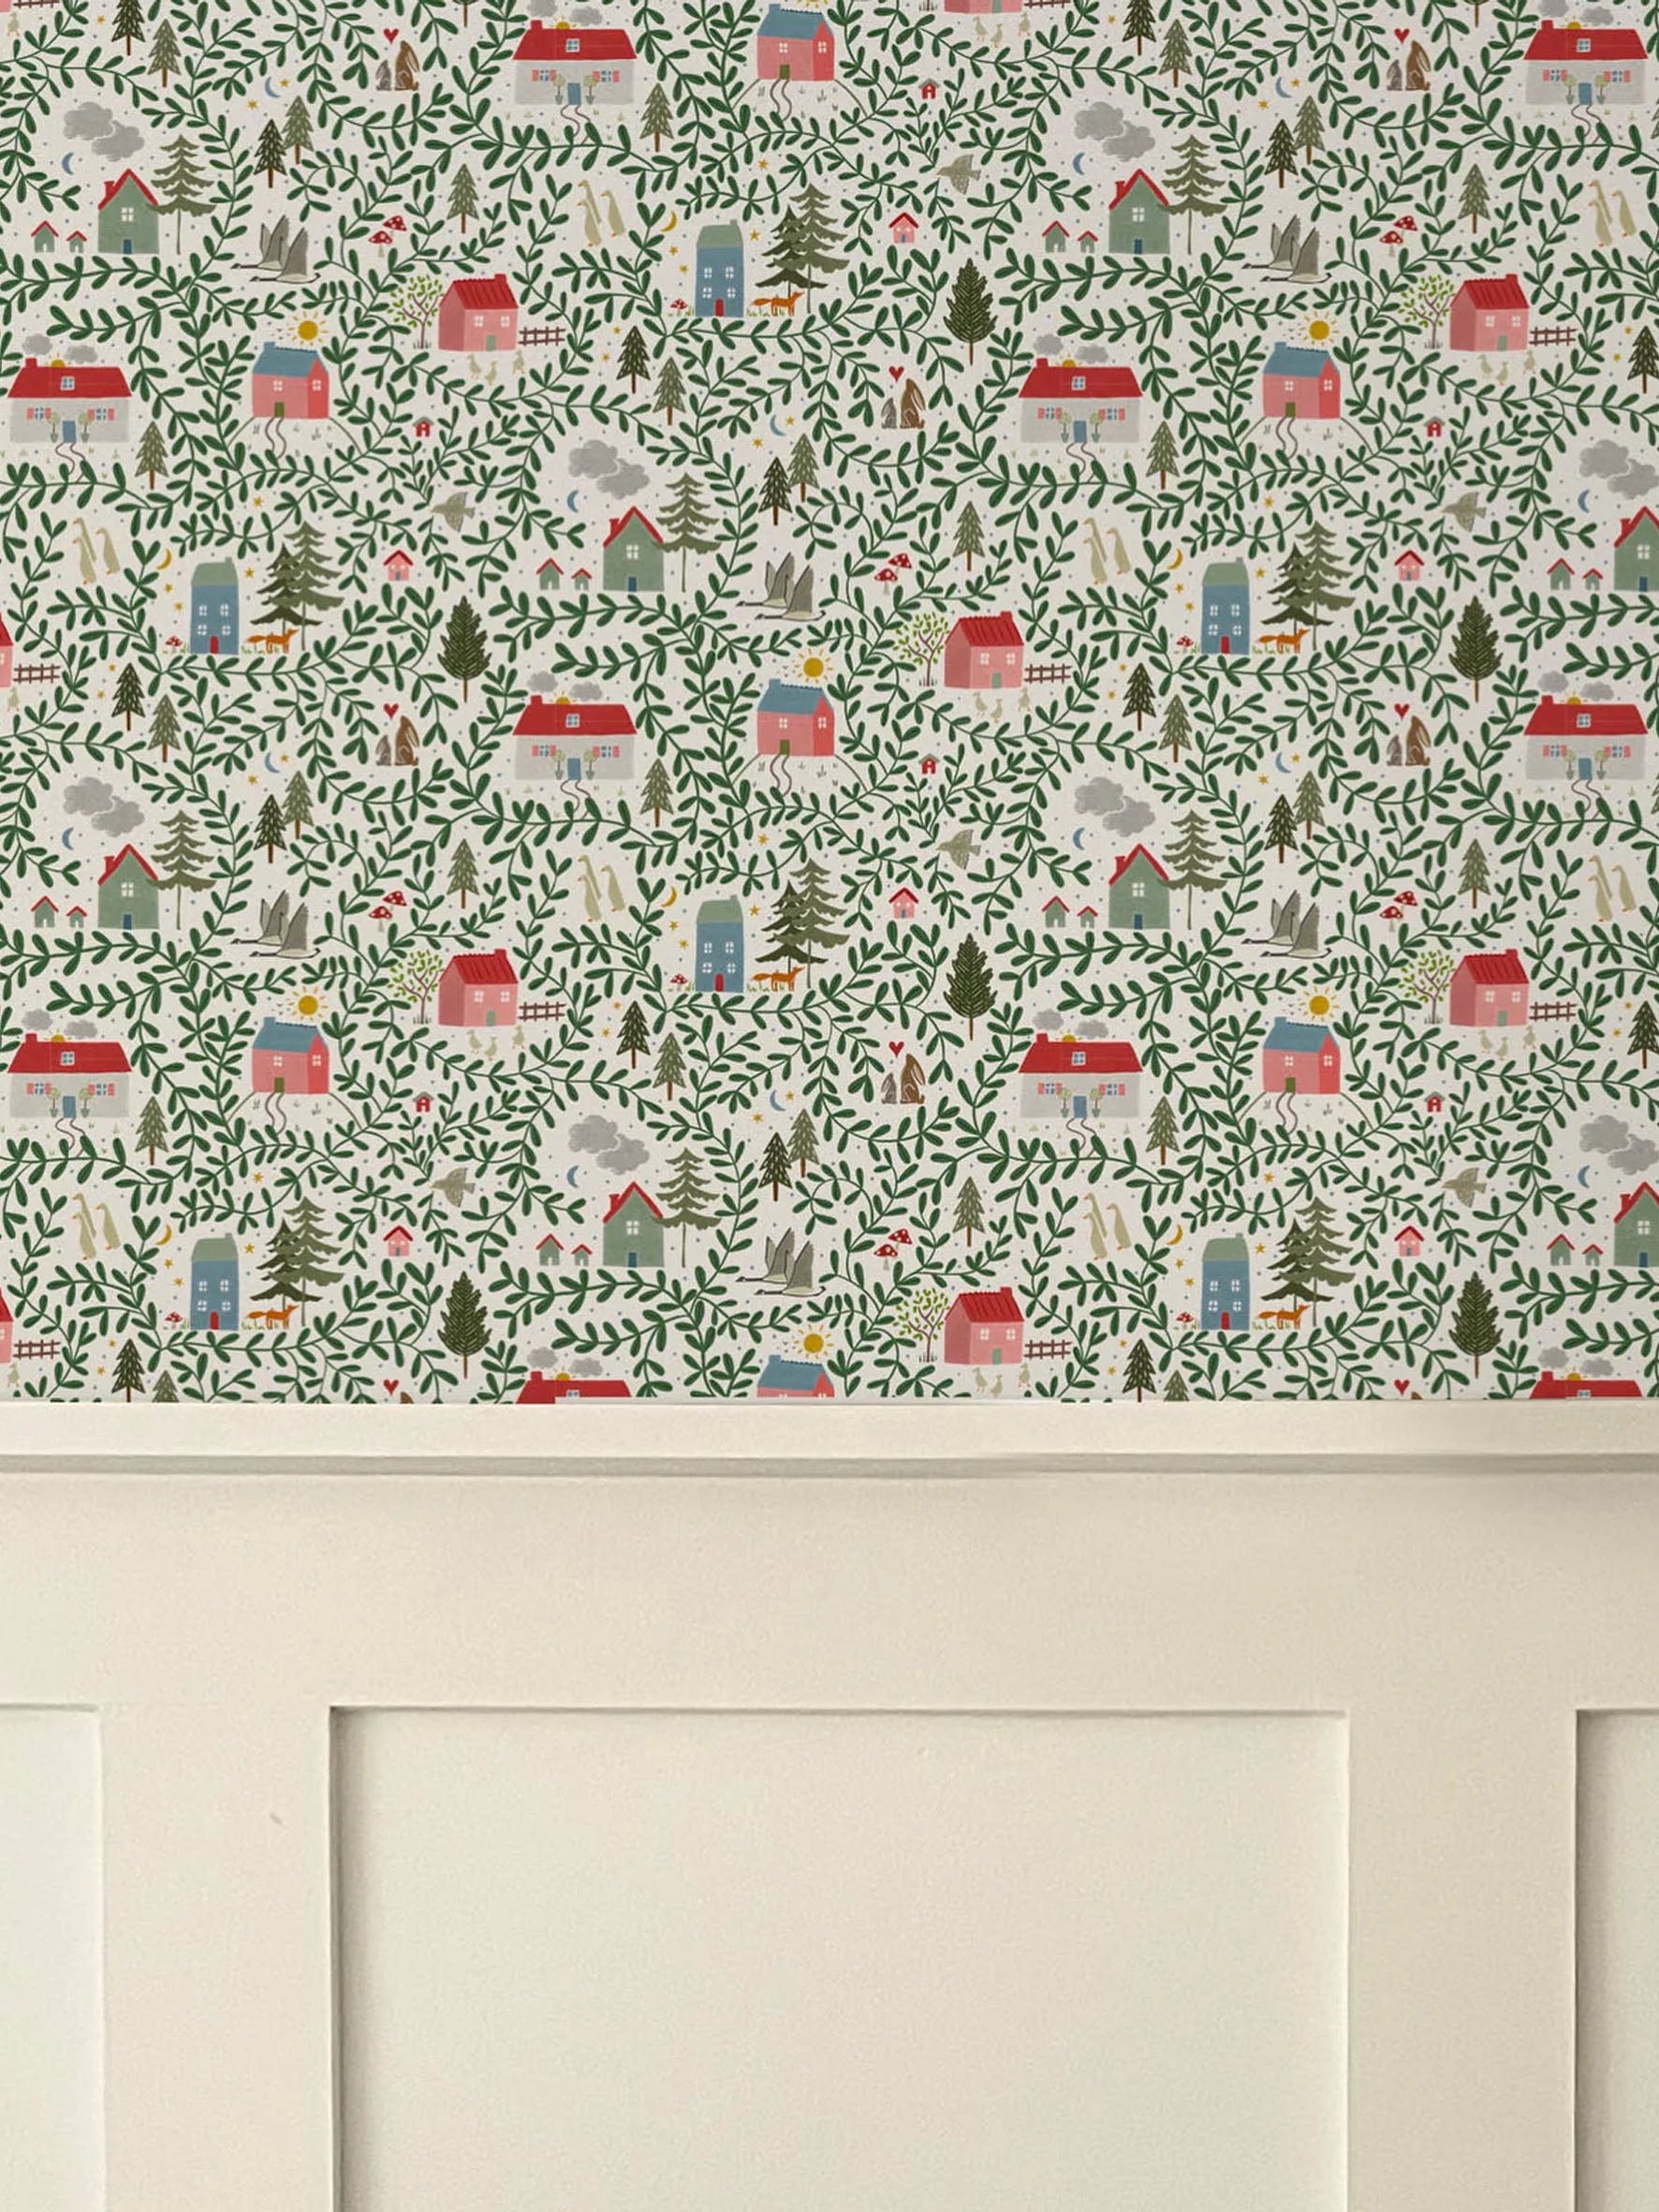 English country cottages luxury children's wallpaper above white wall panelling